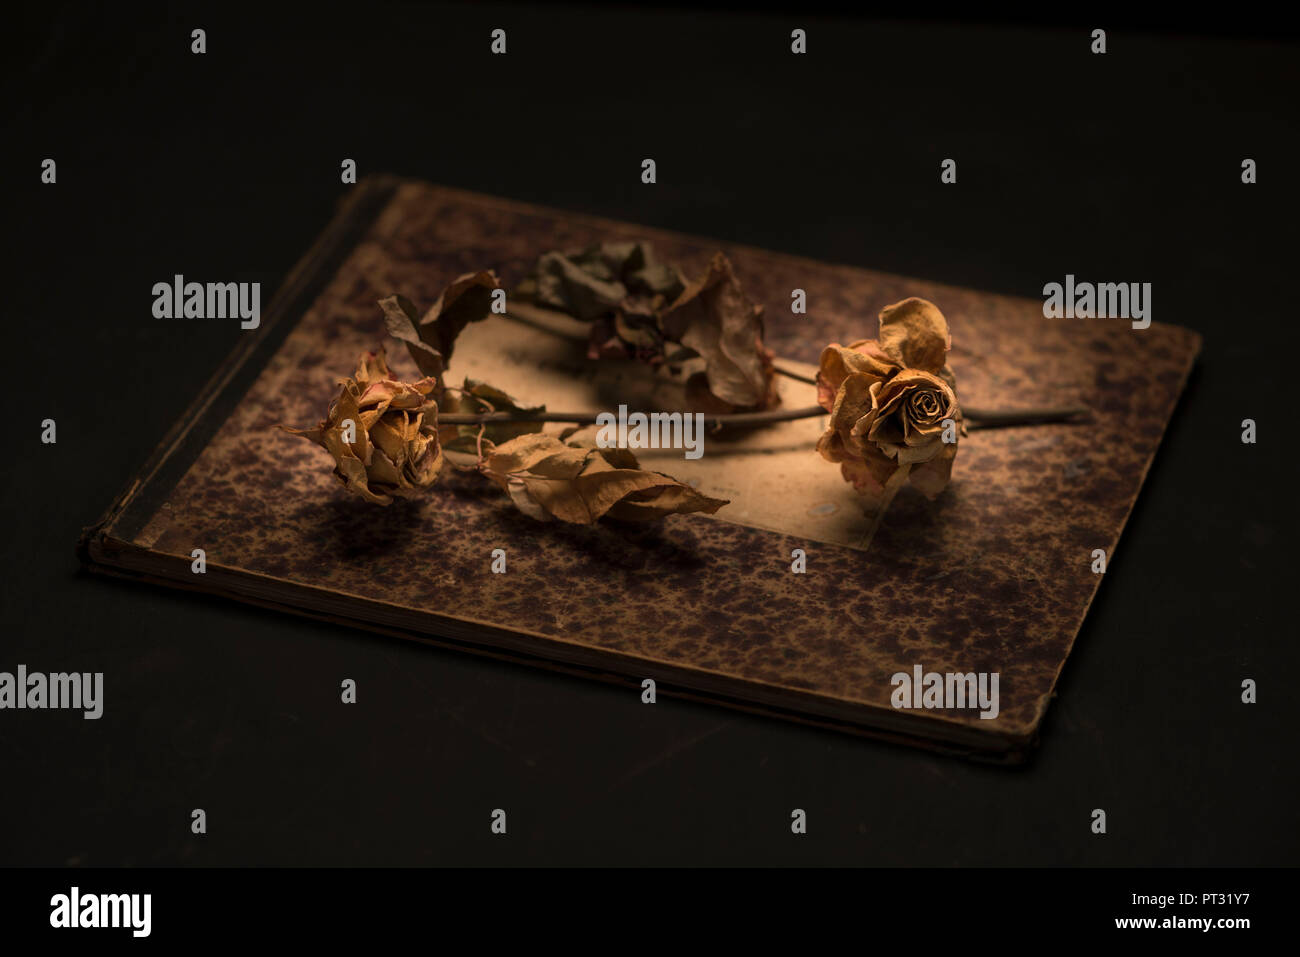 Withered roses on a book Stock Photo